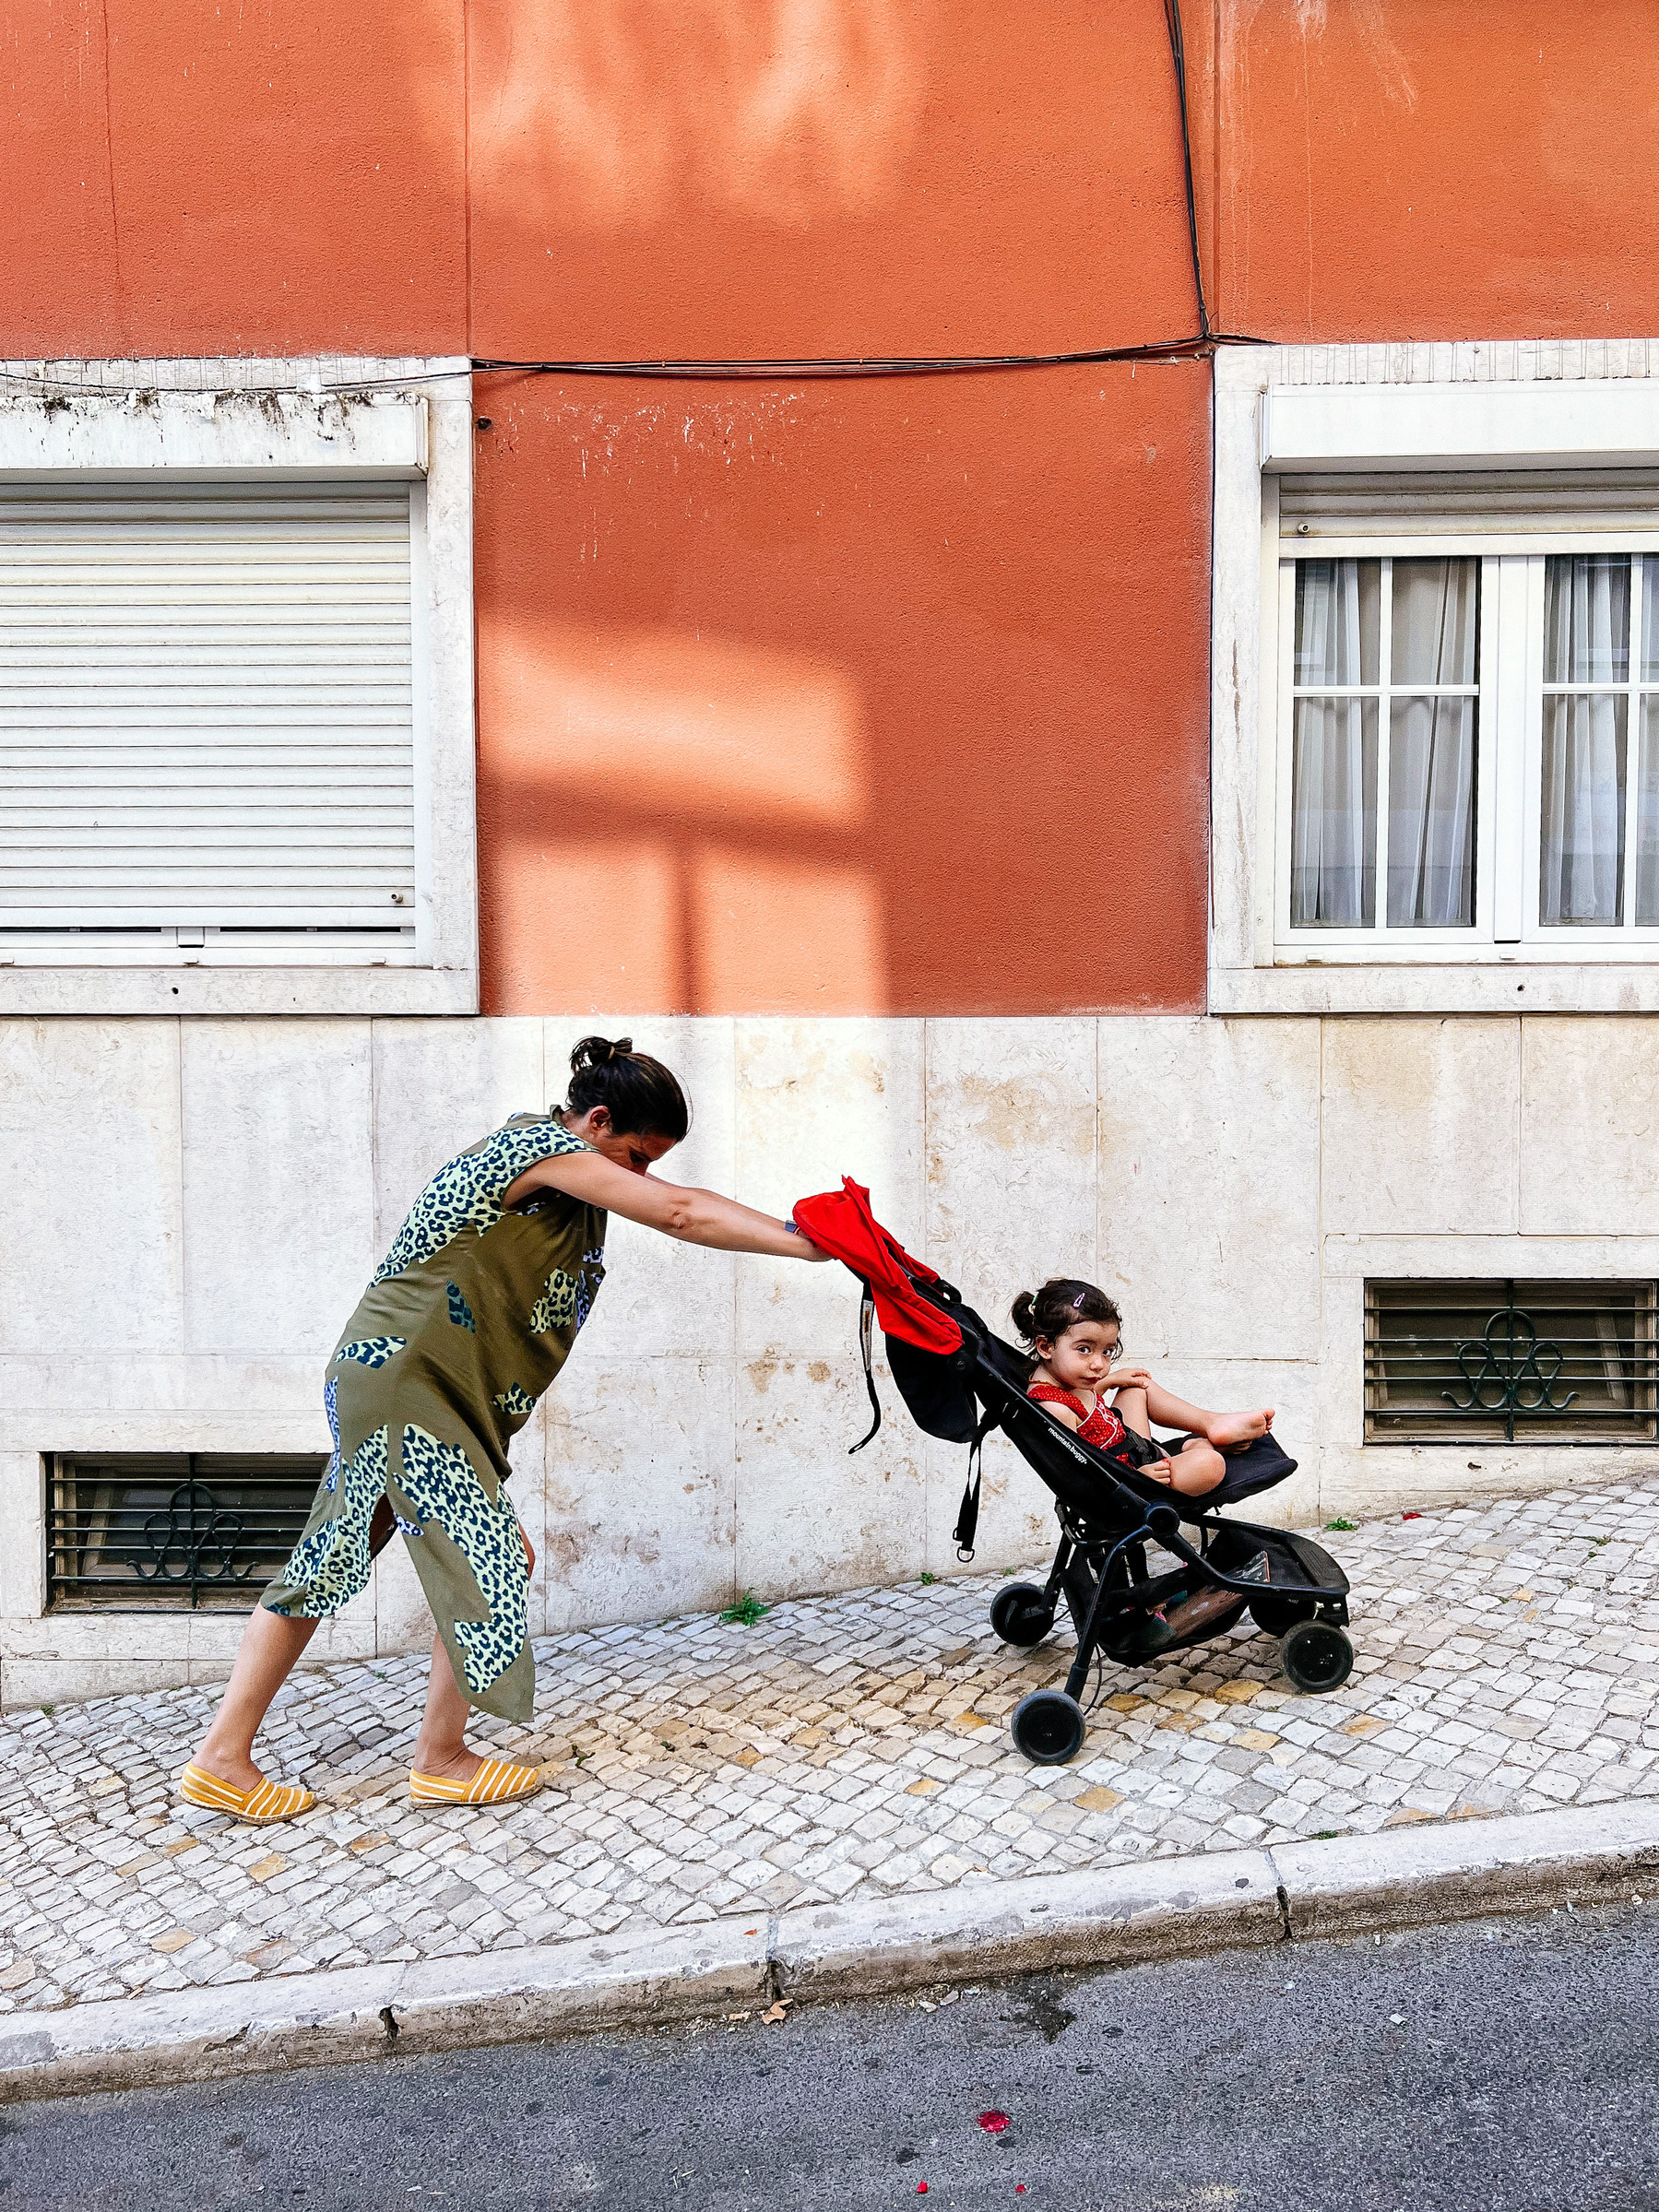 A mom pushes a stroller up a steep street